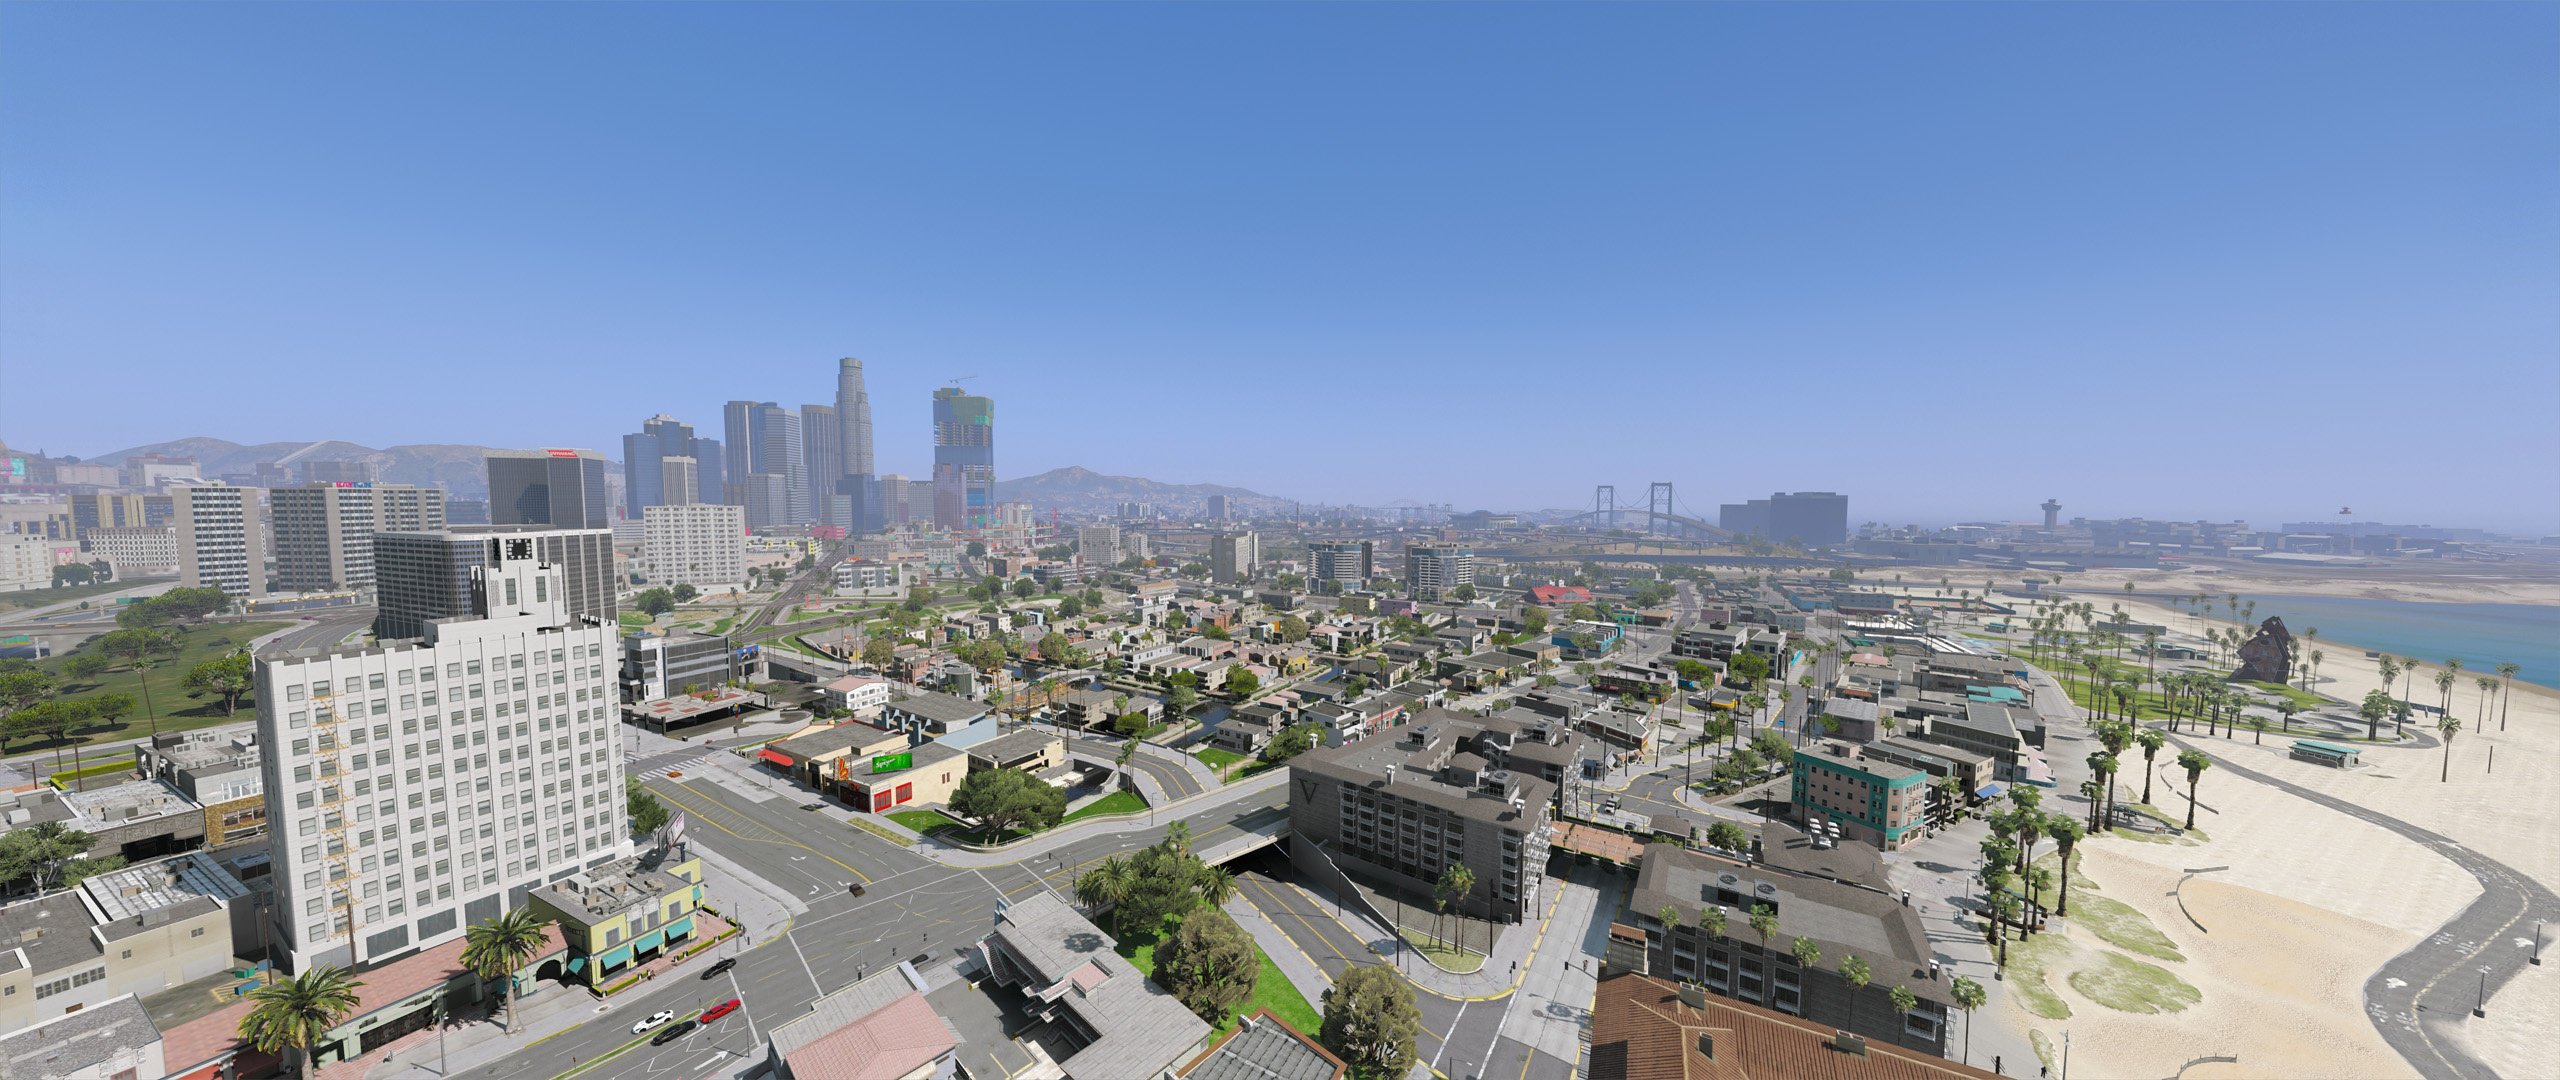 New GTA V Mod Pushes Photorealistic Graphics To the Next Level #2